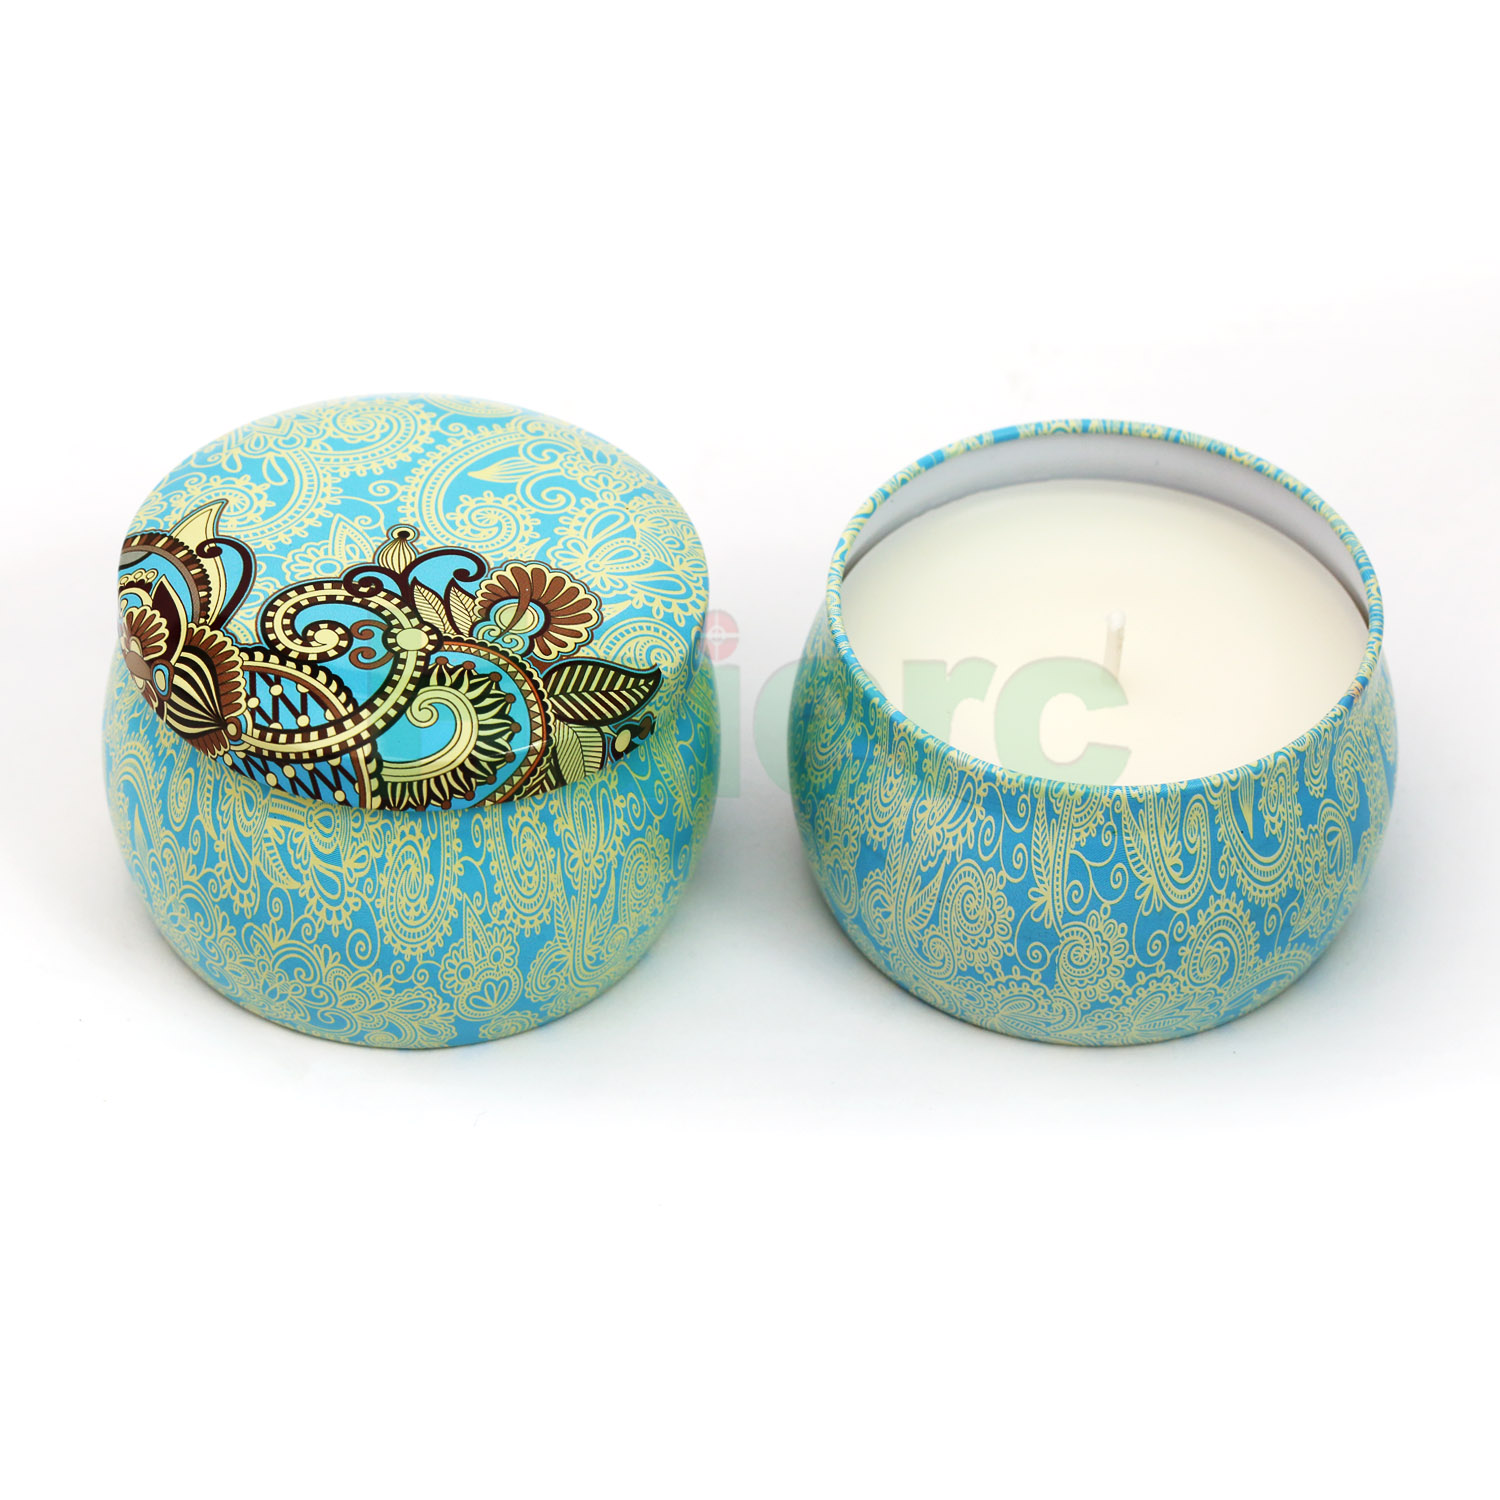 Haierc Bug Repellent Insect Mosquito Repellent Citronella Candle Scented Candle